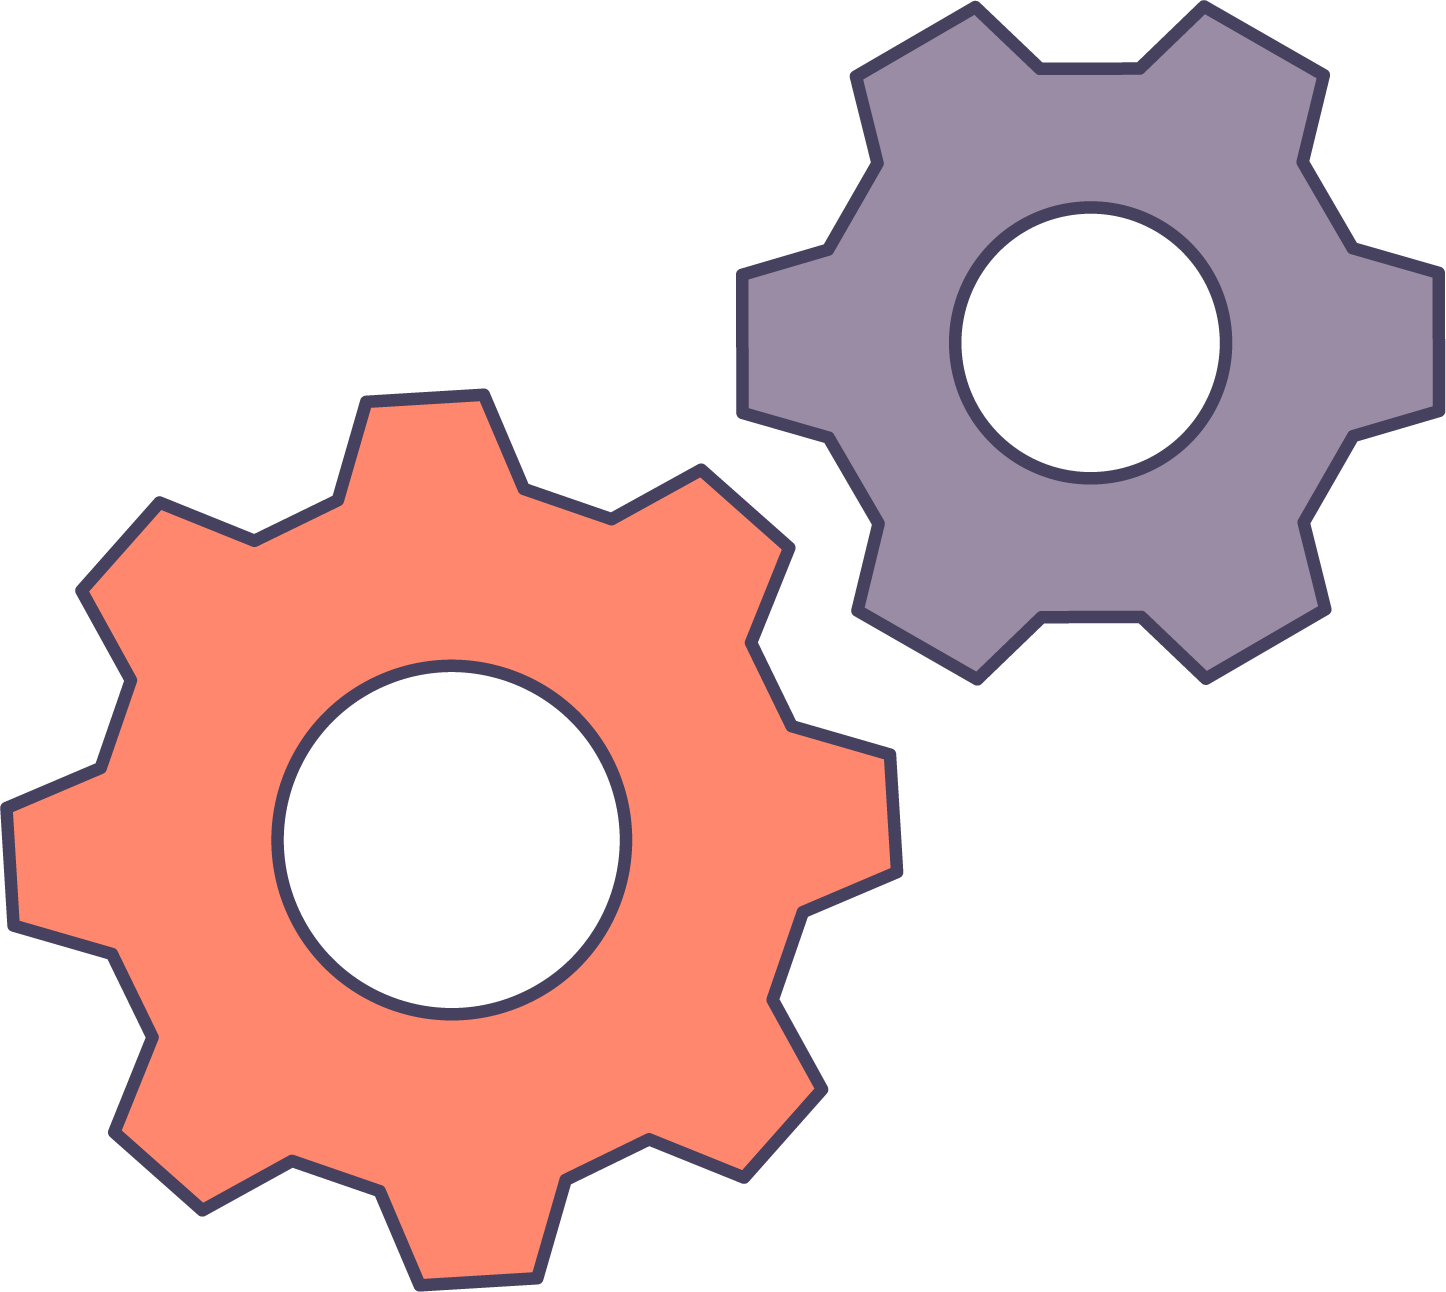 Icon of a of two cogs, one small and one larger cog.